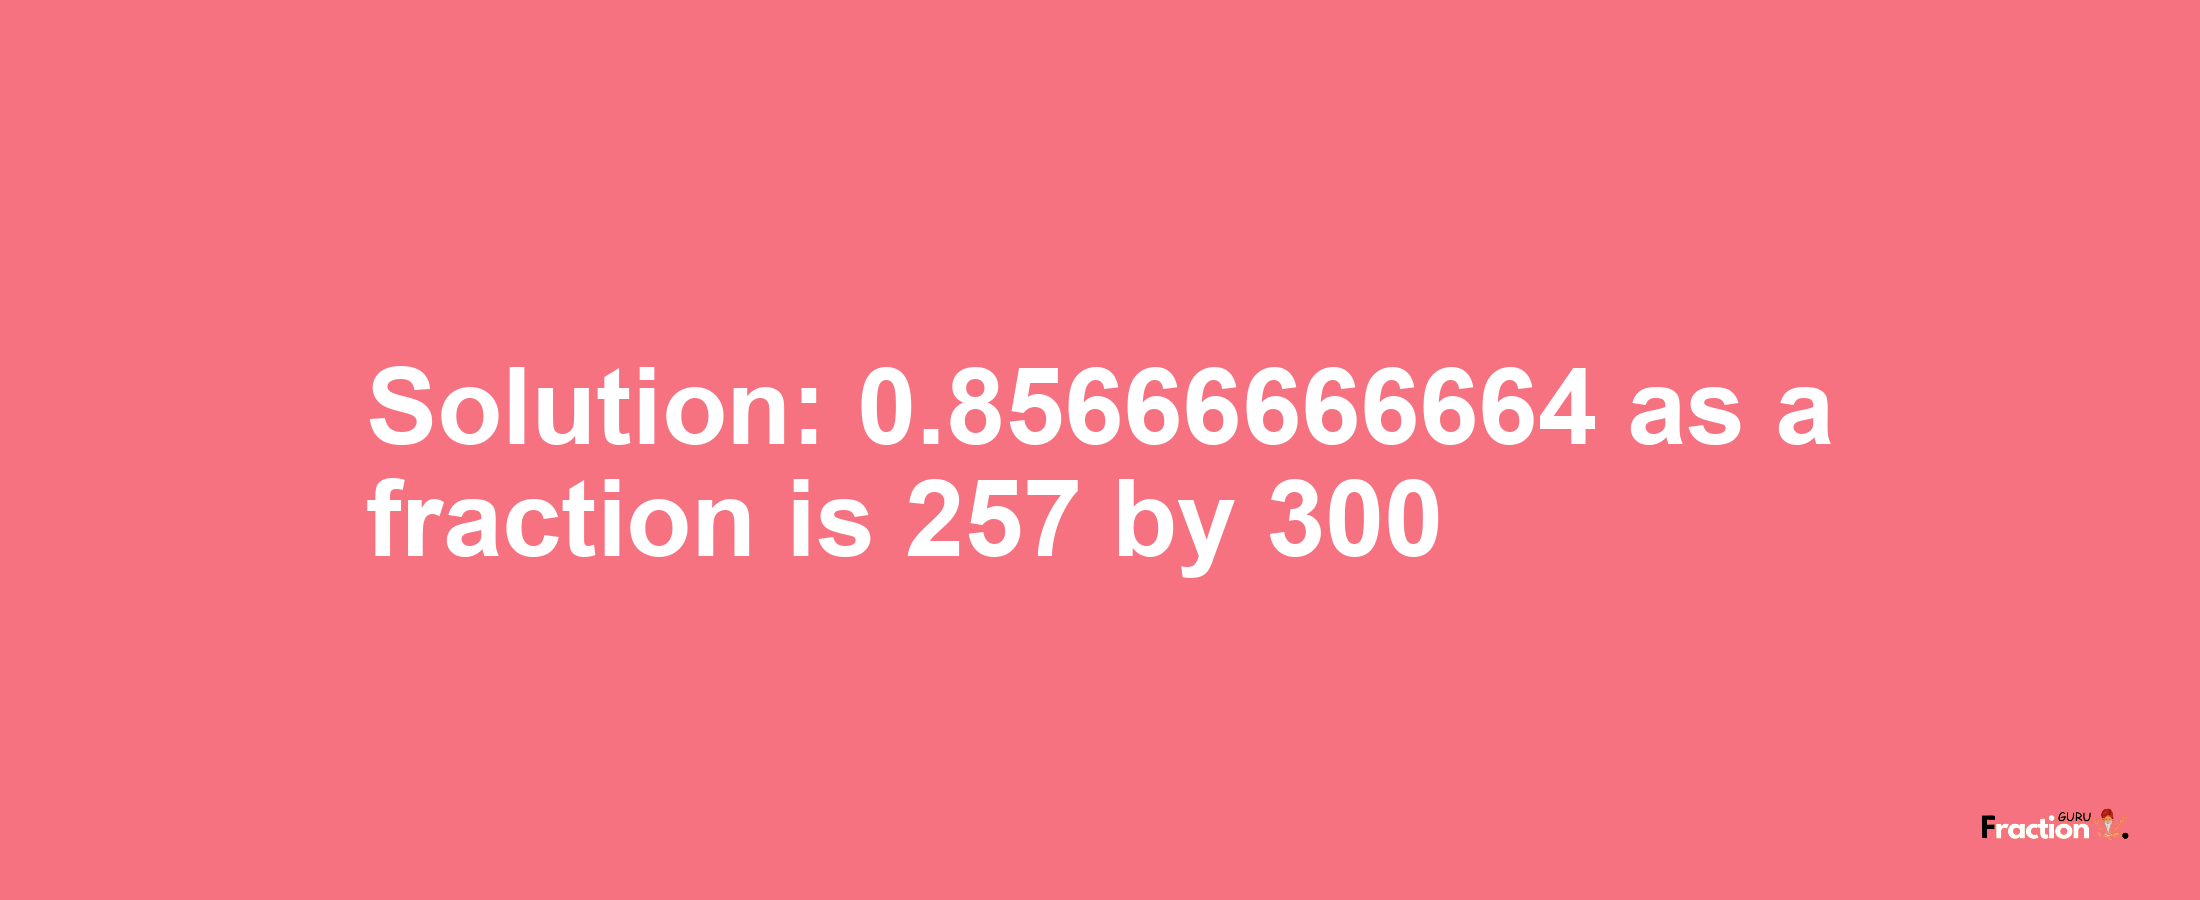 Solution:0.85666666664 as a fraction is 257/300